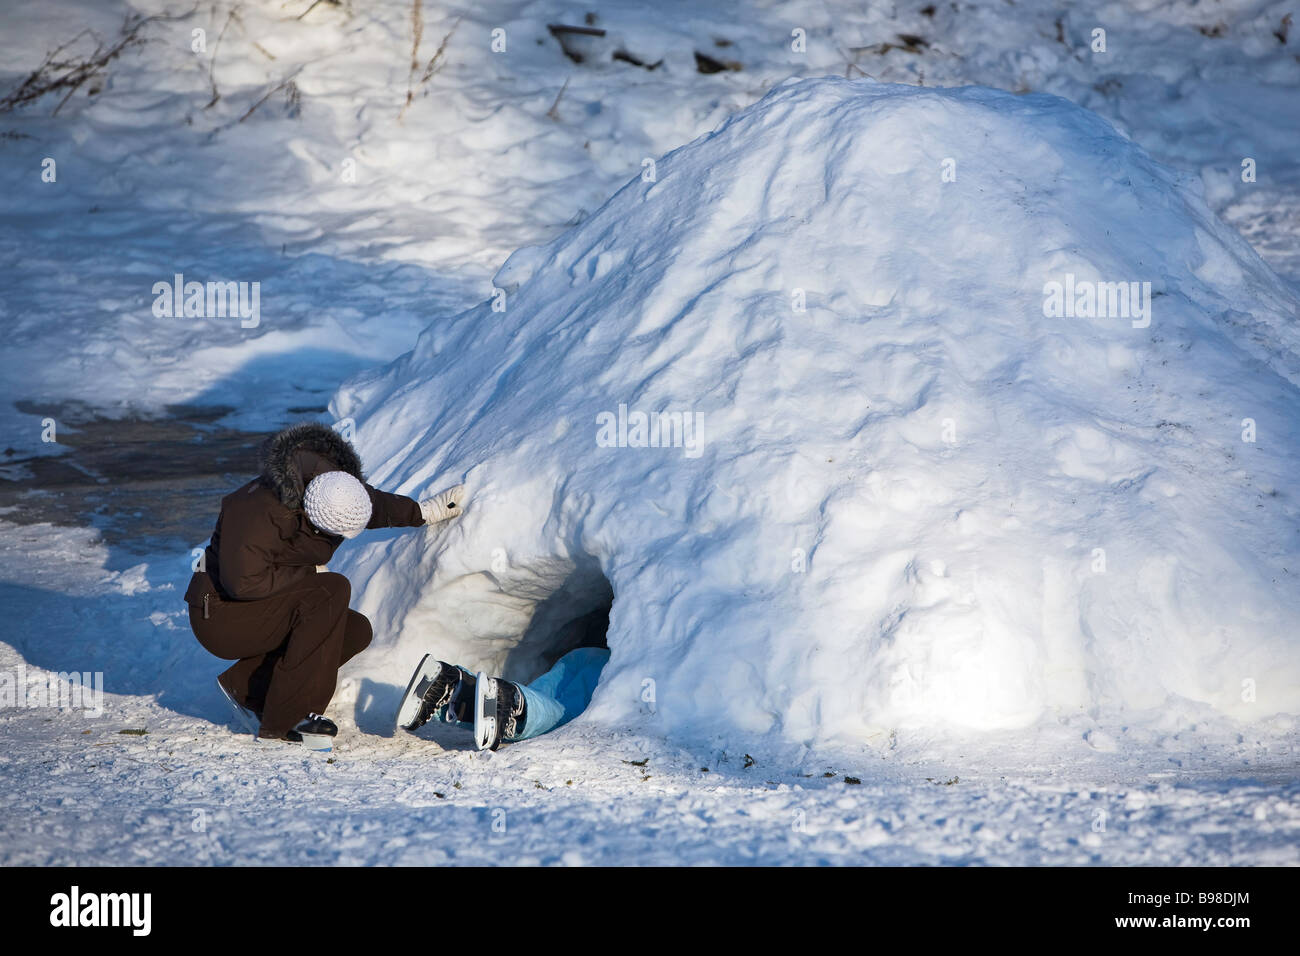 Young child exploring a quinzee or snow cave. Stock Photo